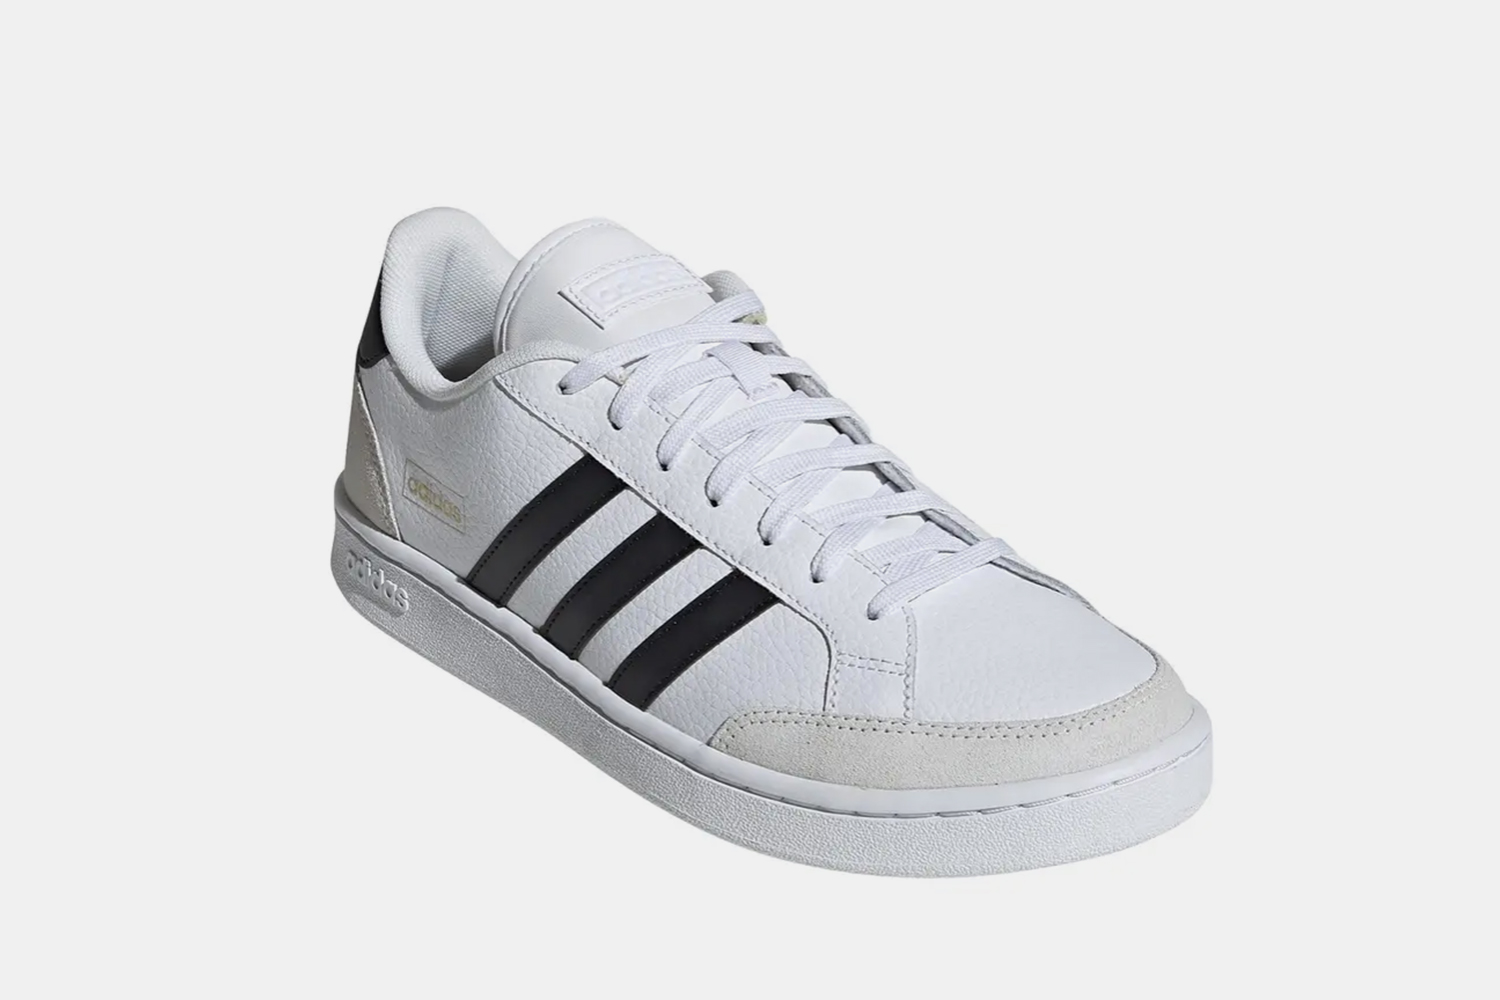 Adidas Grand Court SE Leather Sneaker